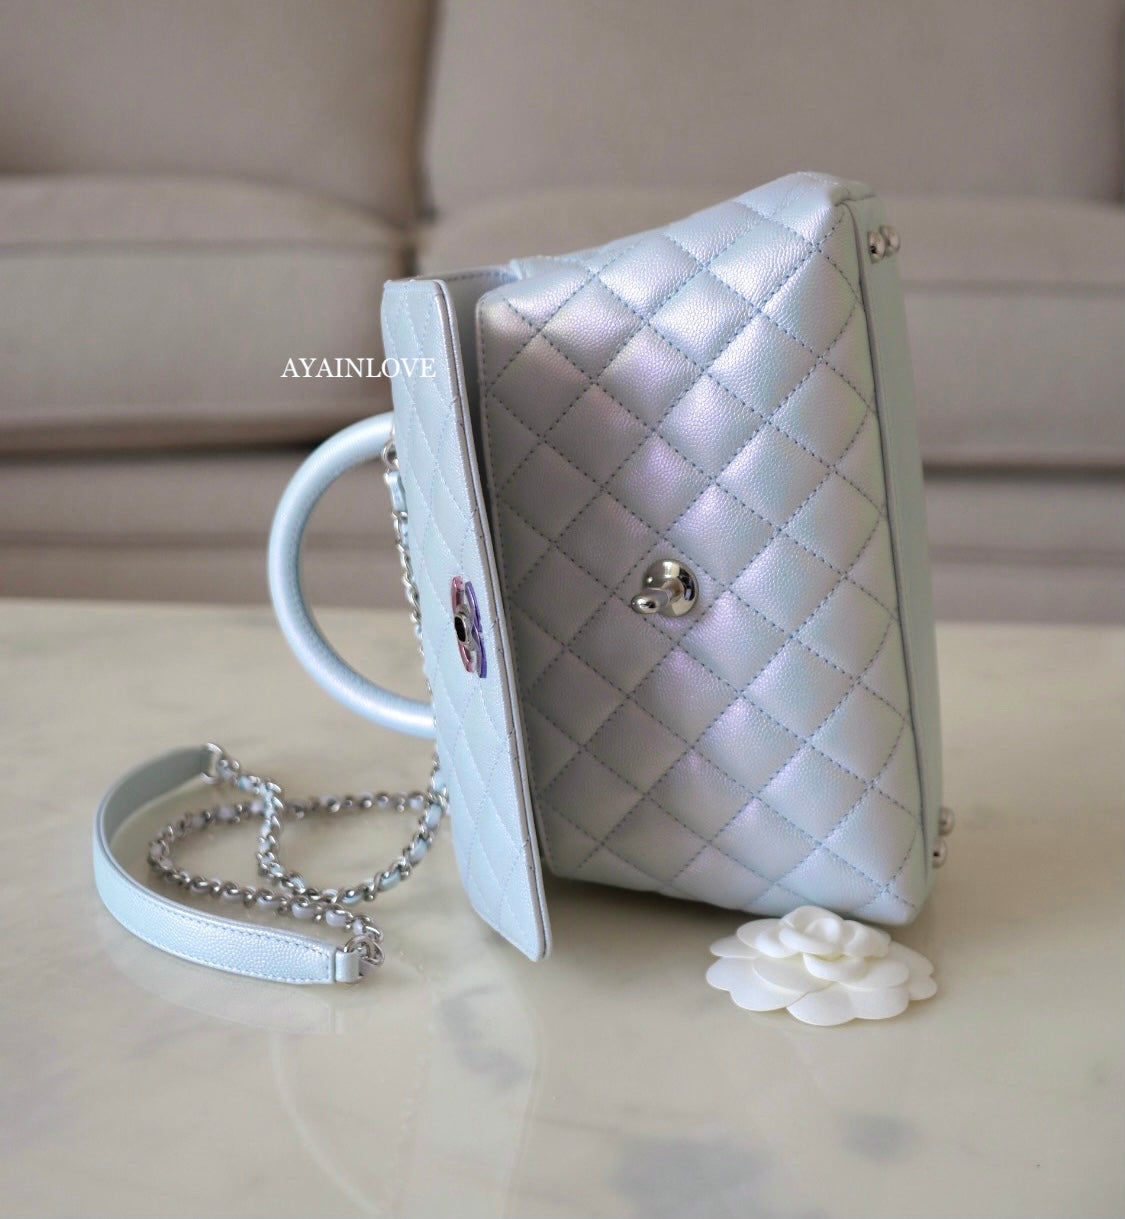 Chanel Classic Medium Flap 21K Silver Caviar with silver hardware